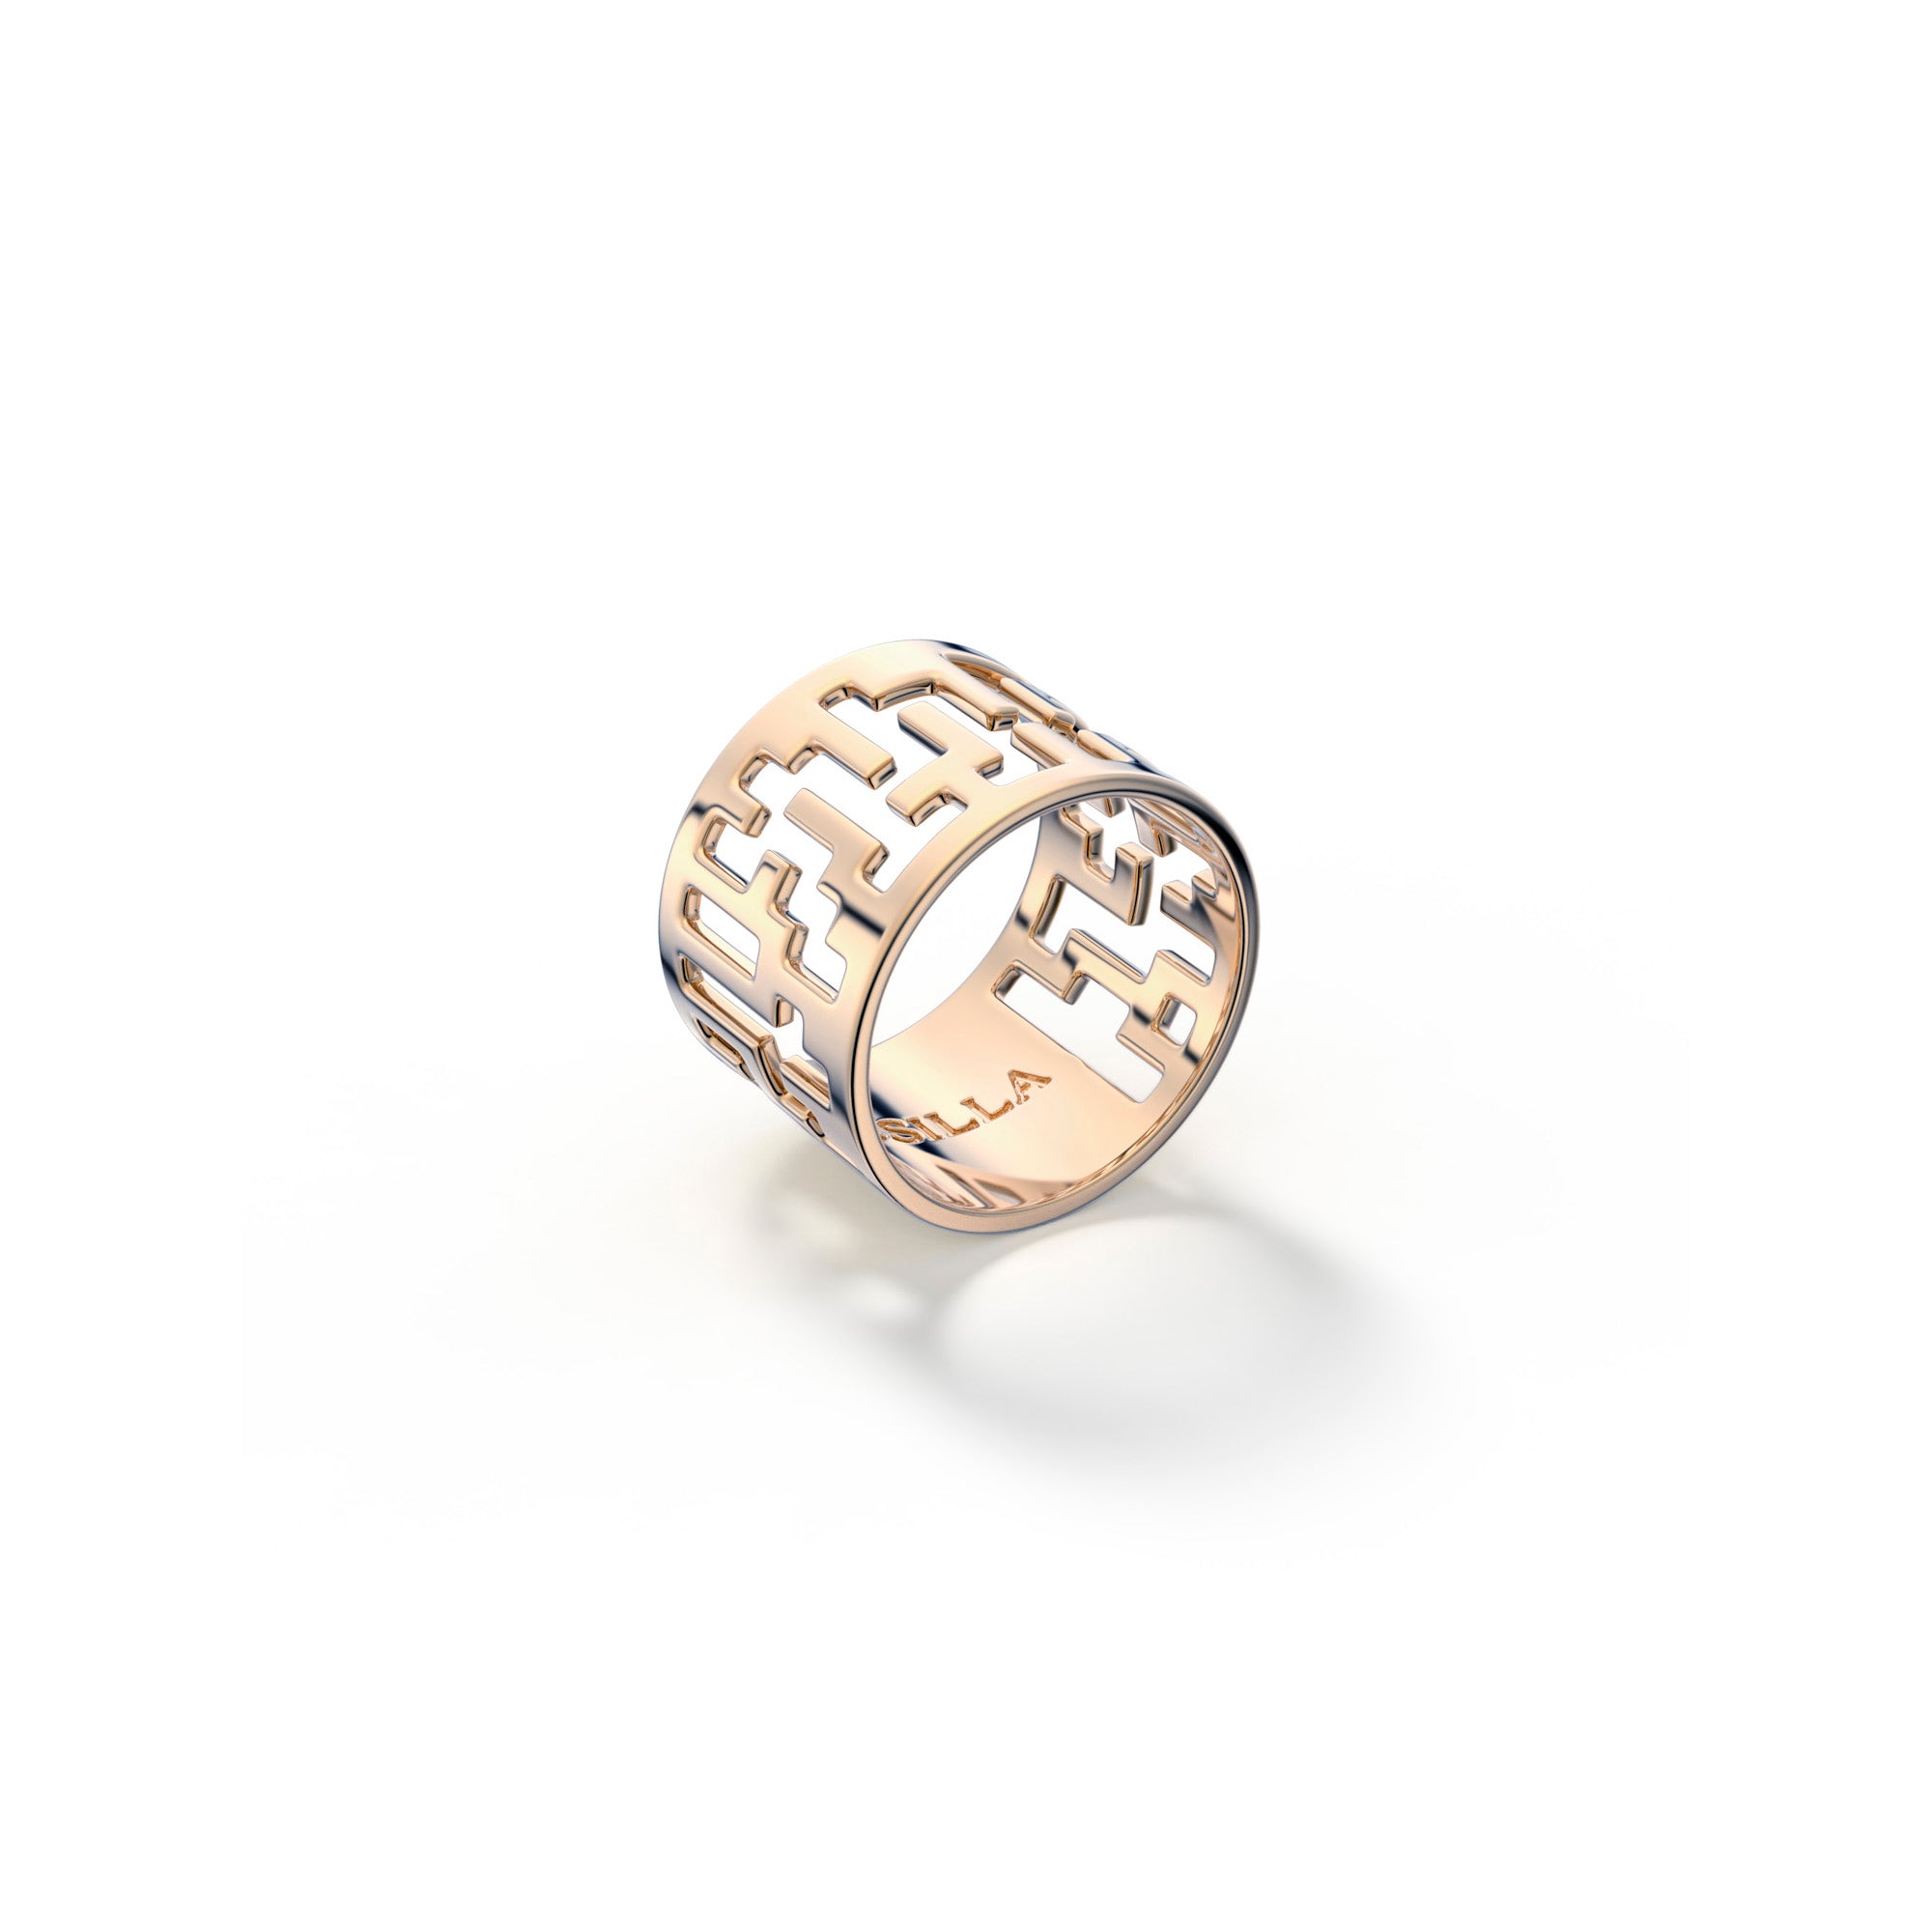 'A-Māz-Me' Icy Yellow Gold Ring